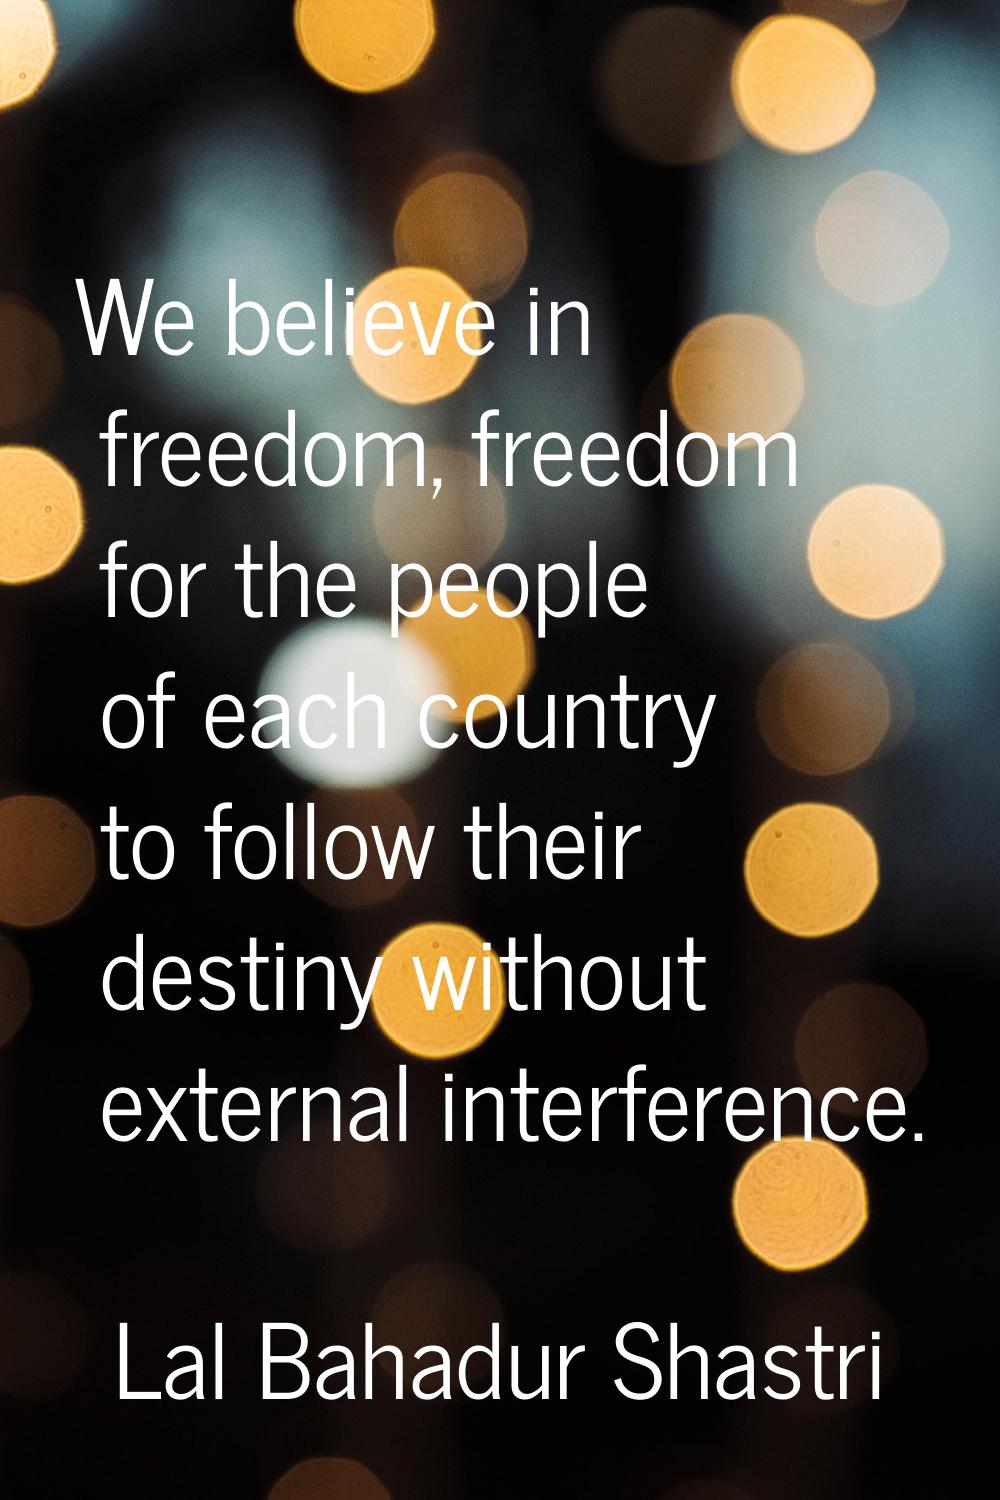 We believe in freedom, freedom for the people of each country to follow their destiny without exter